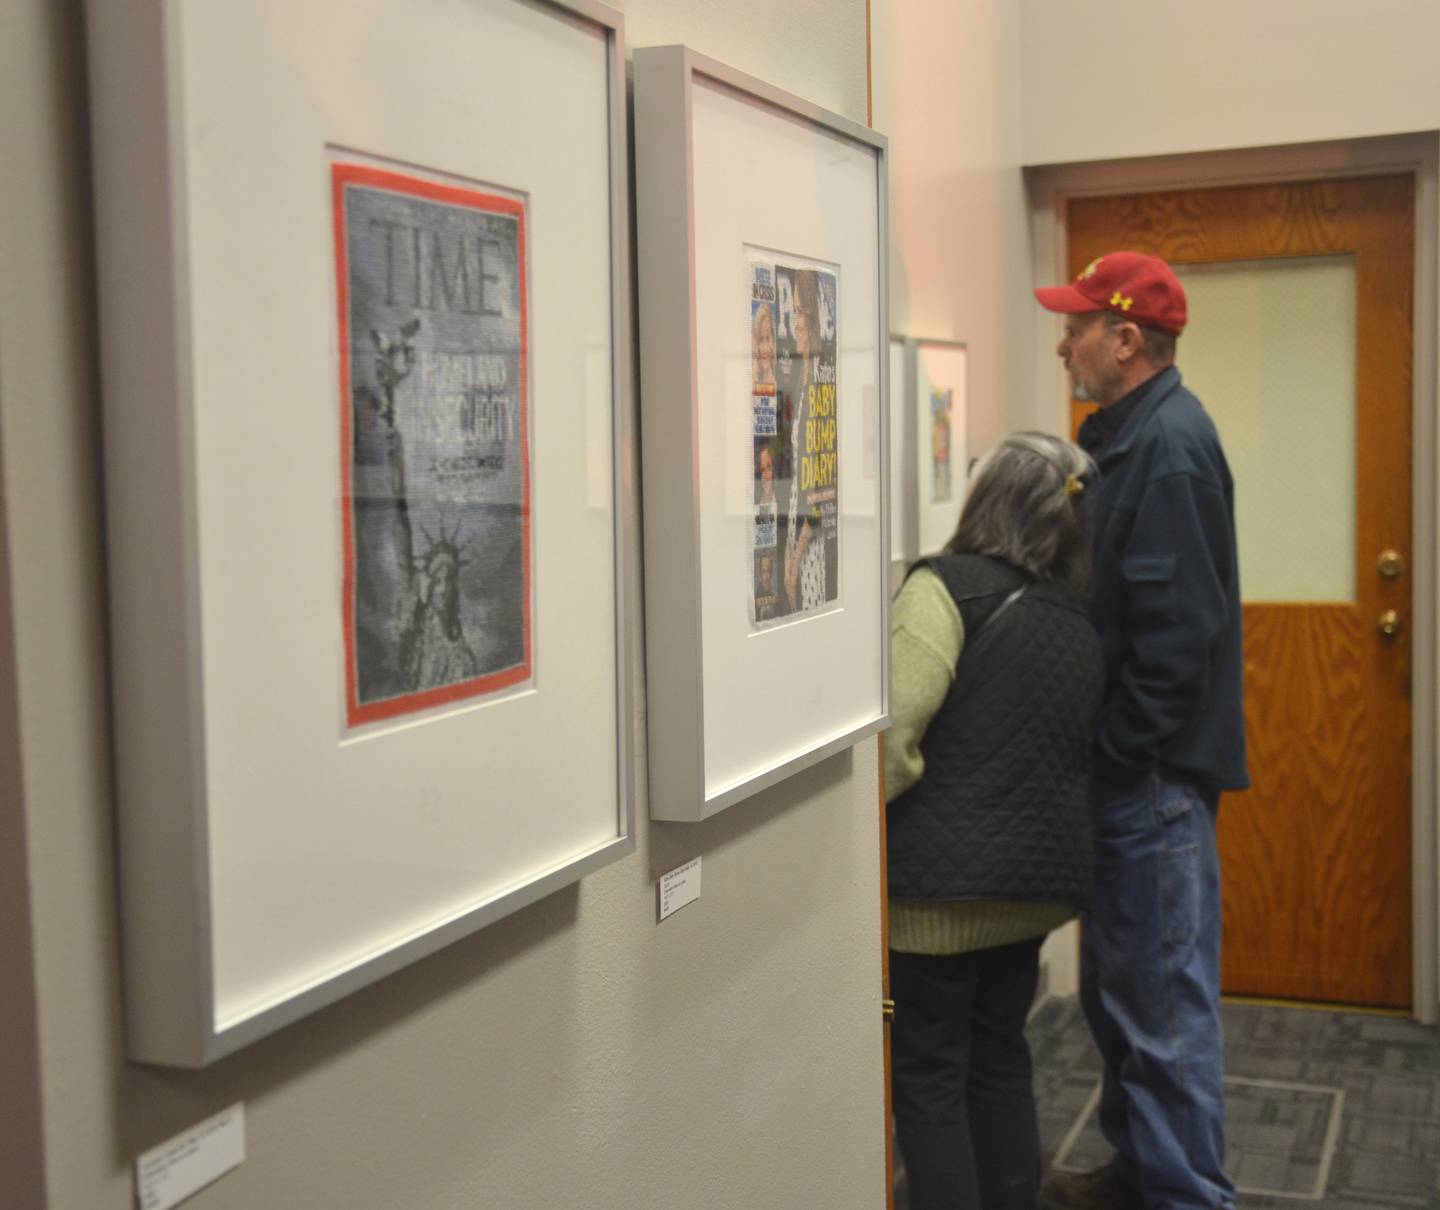 Drinkwater's work is on display at the Creston Arts Depot Gallery at the Restored Depot.